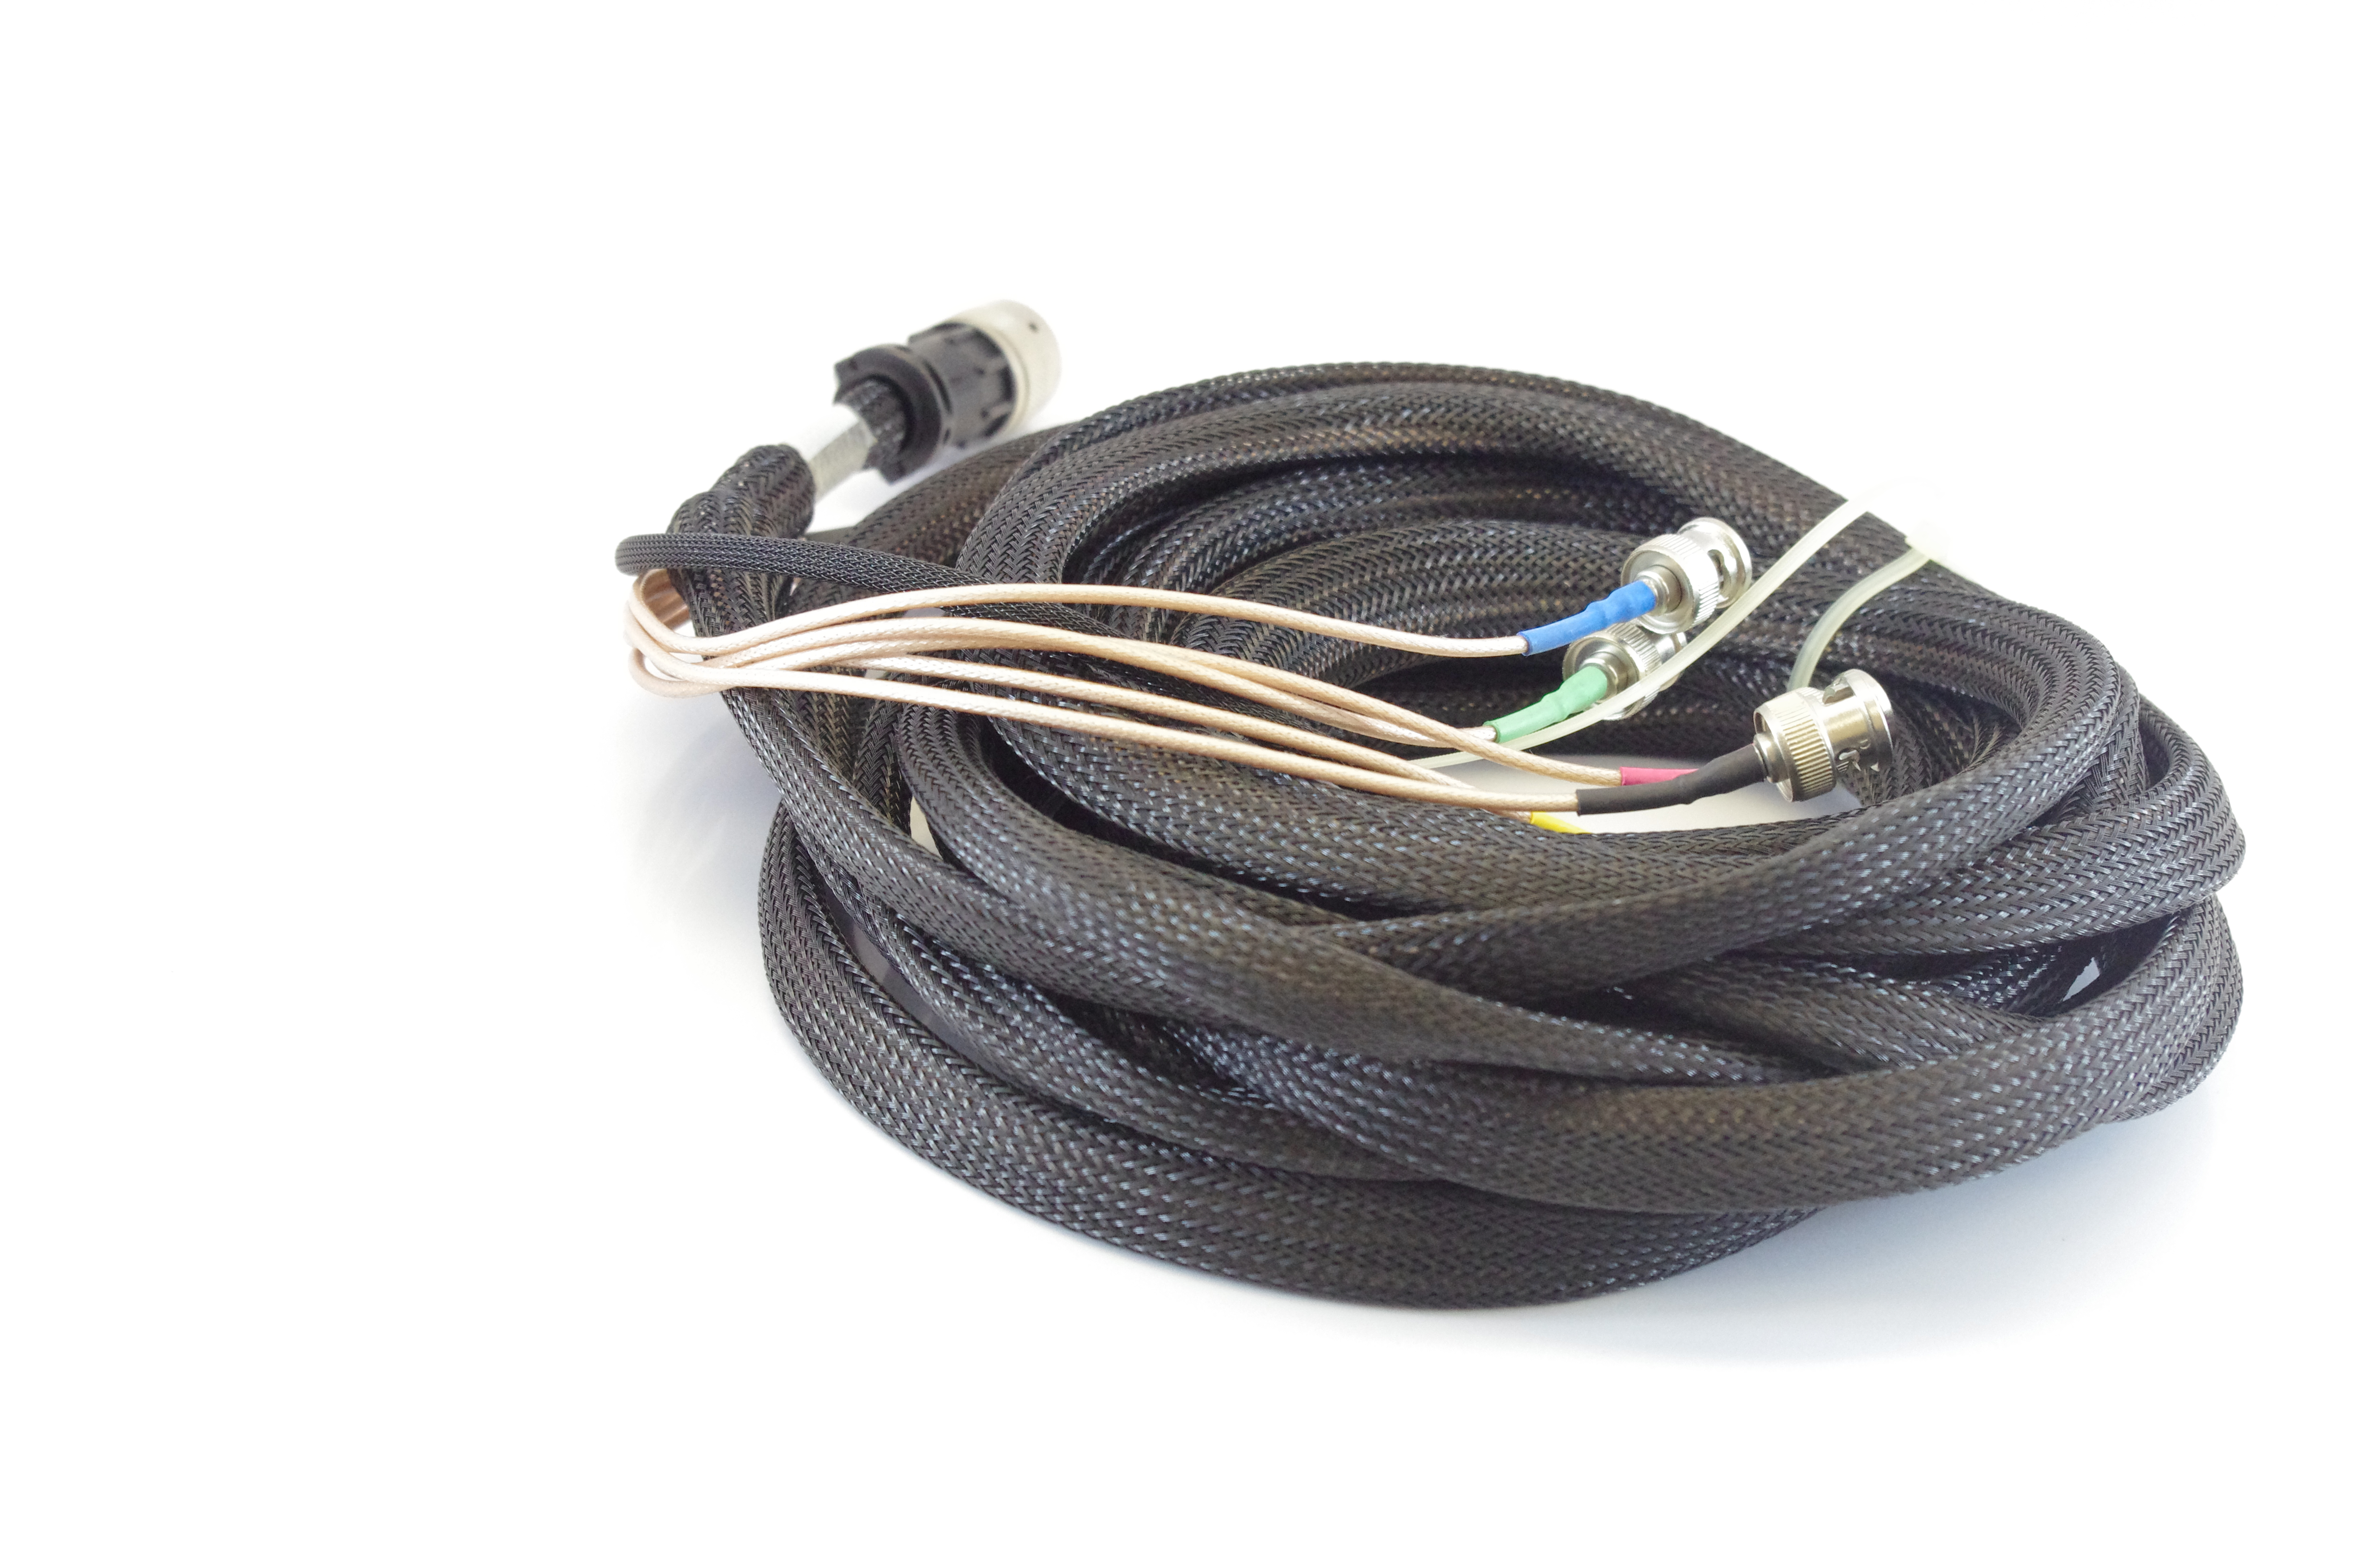 Olympus Video Monitor Cable - 55583L25 (25 ft.)